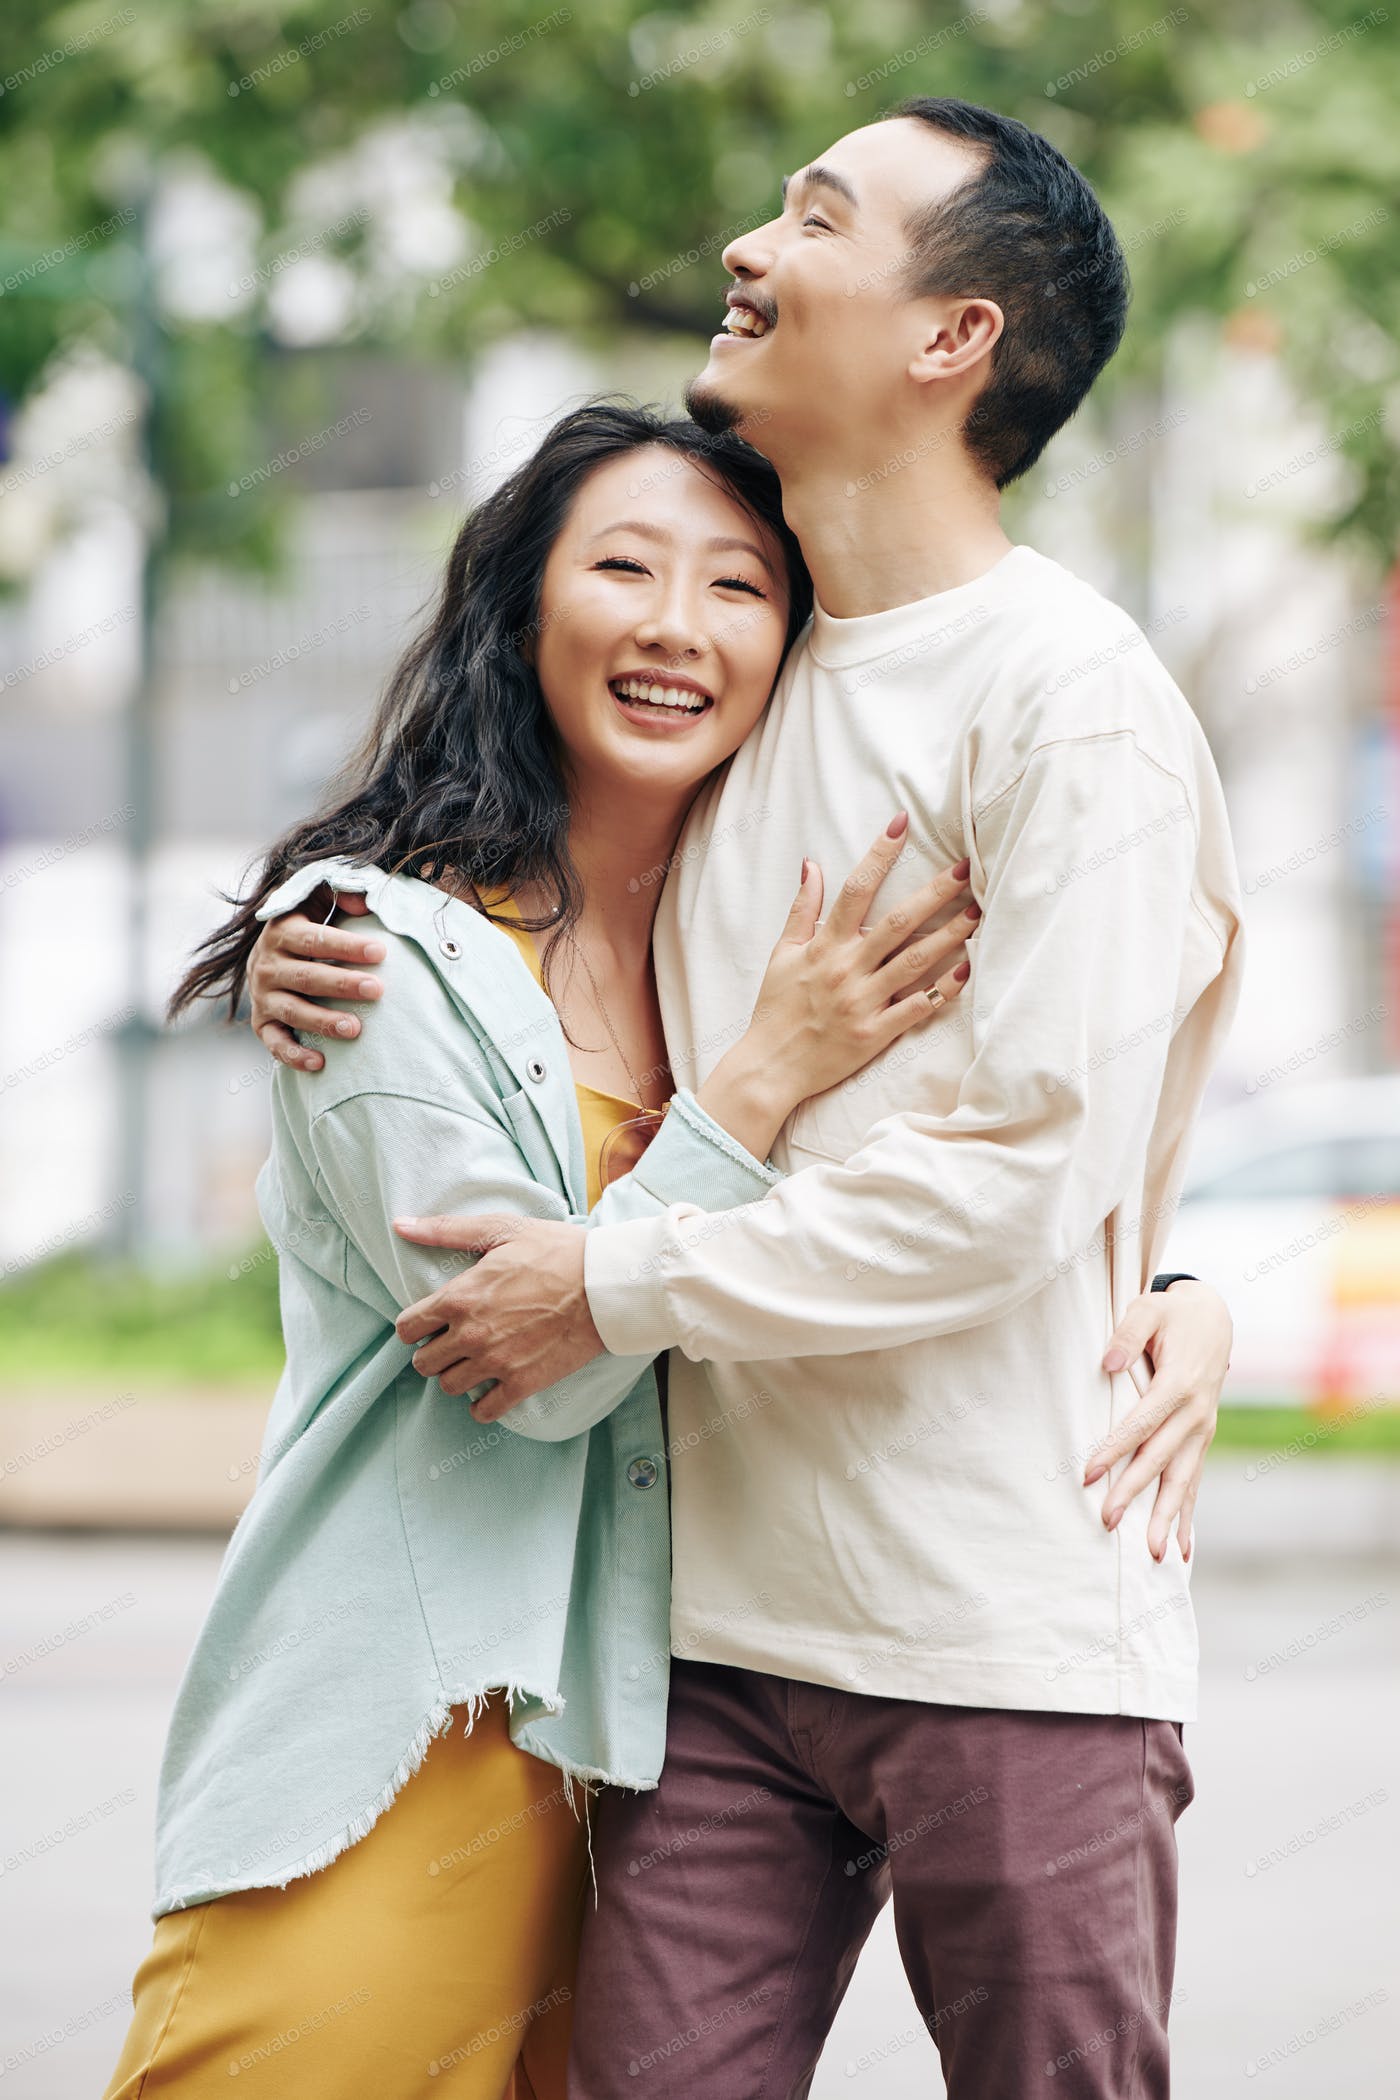 Happy Chinese couple in love photo by Dragonimage on Envato Elements